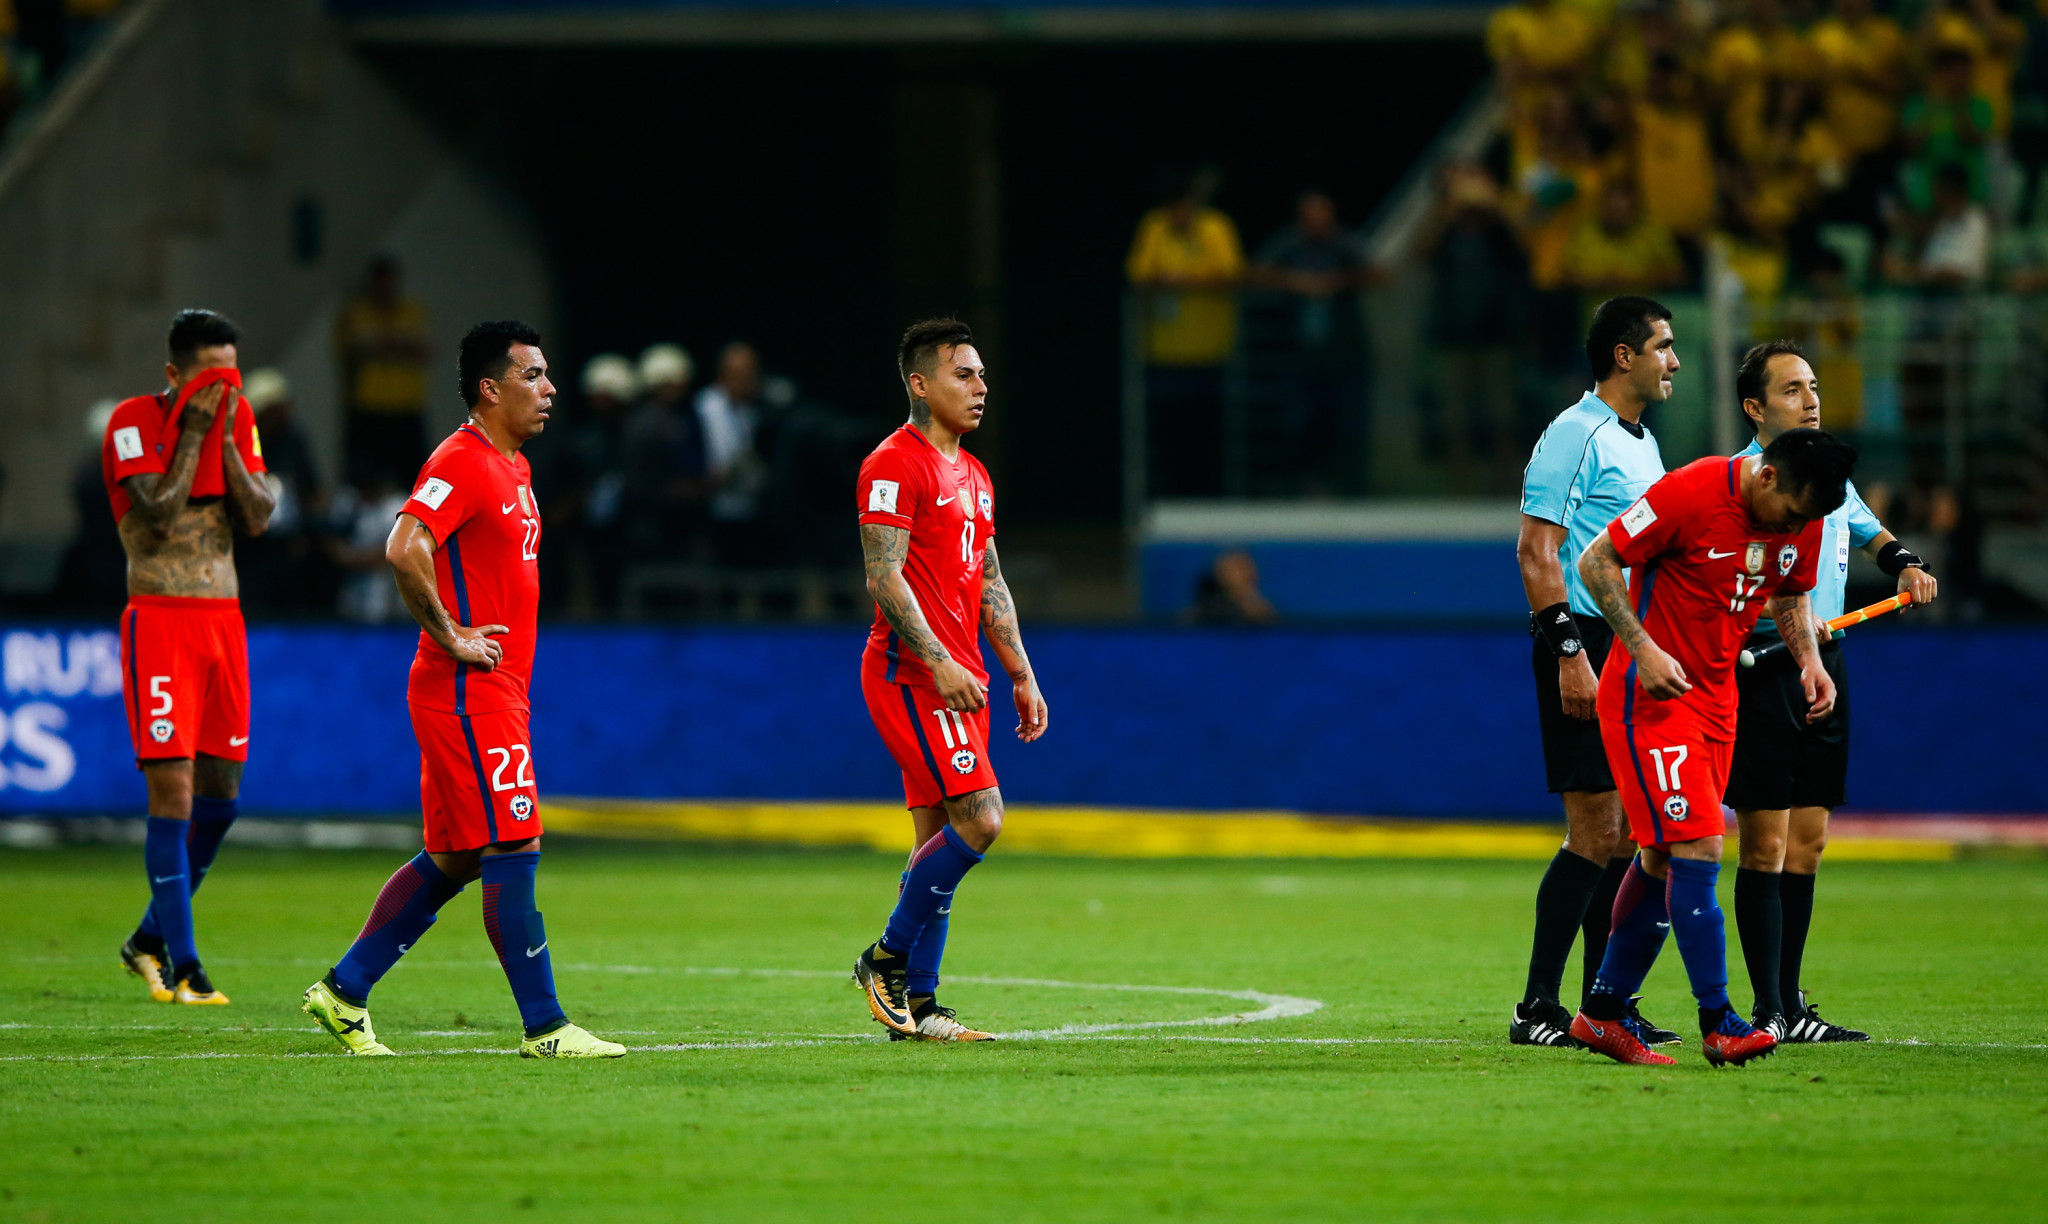 Chile were forced to play some fixtures away from their national stadium after sanctions from FIFA ©Getty Images